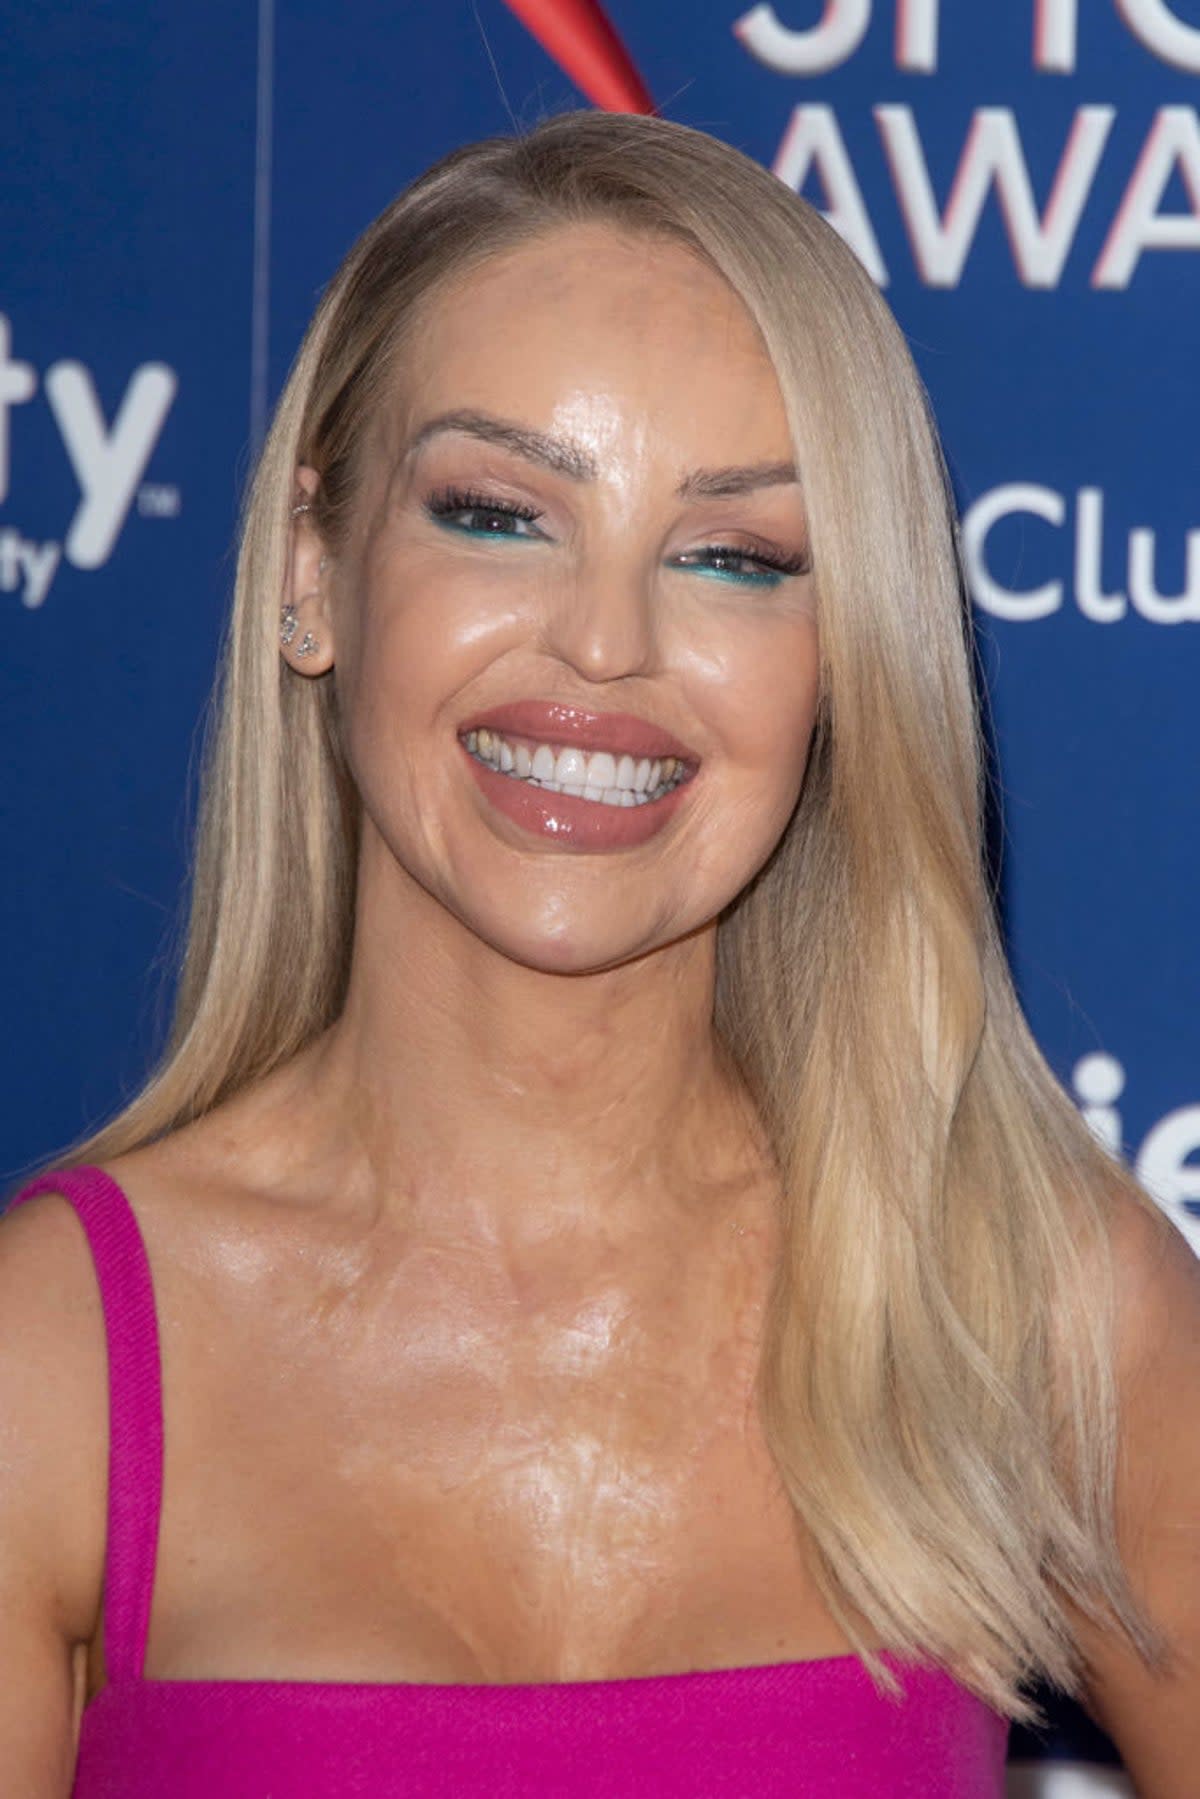 The ‘Corrie’ team worked with Katie Piper’s foundation while researching the storyline – the TV presenter survived an acid attack in 2008 (Getty)